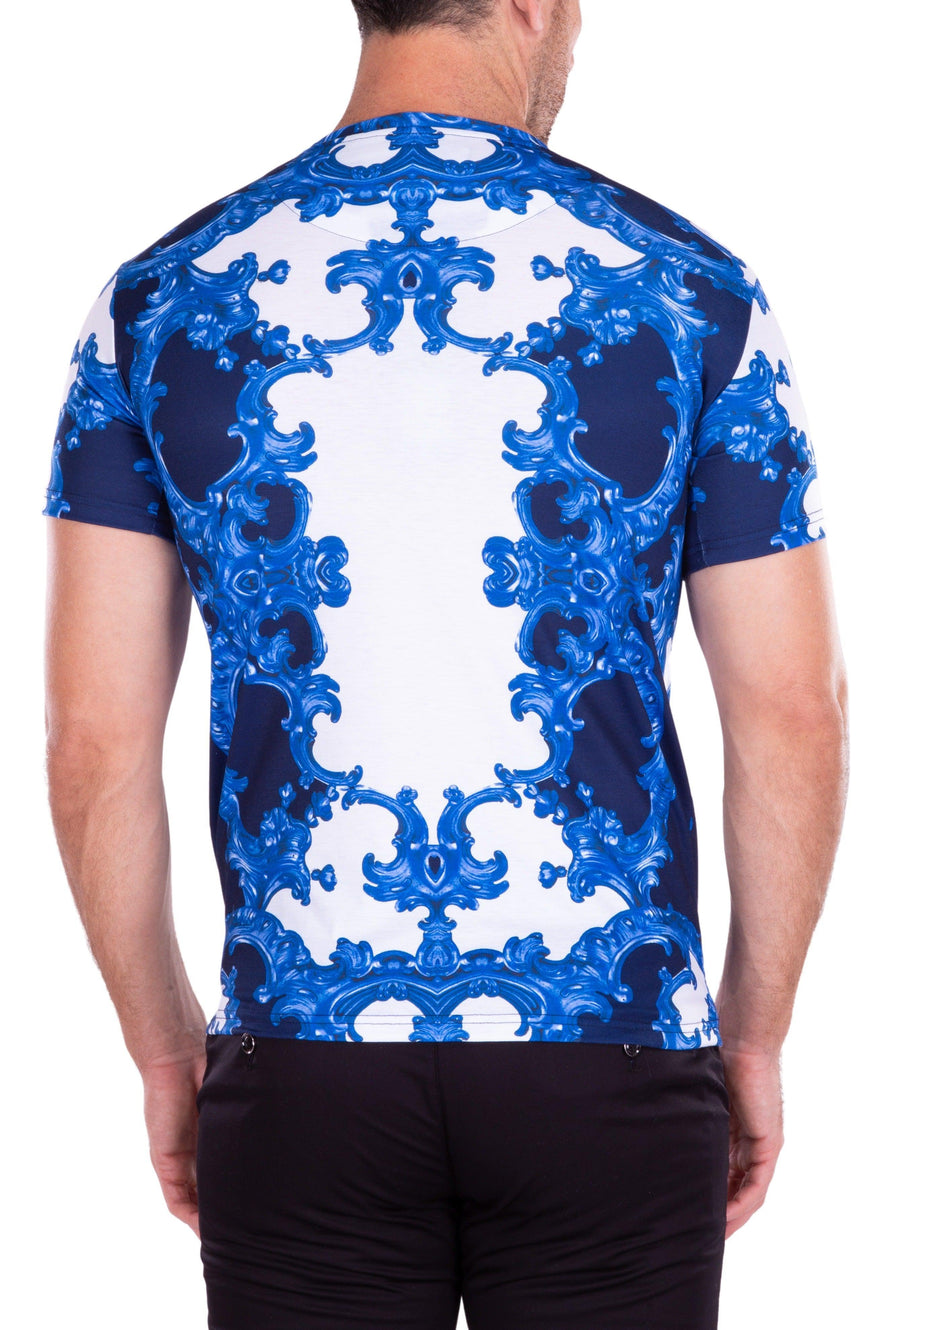 Antique Flourish Abstract Bold Printed All-Over Graphic Tee Blue